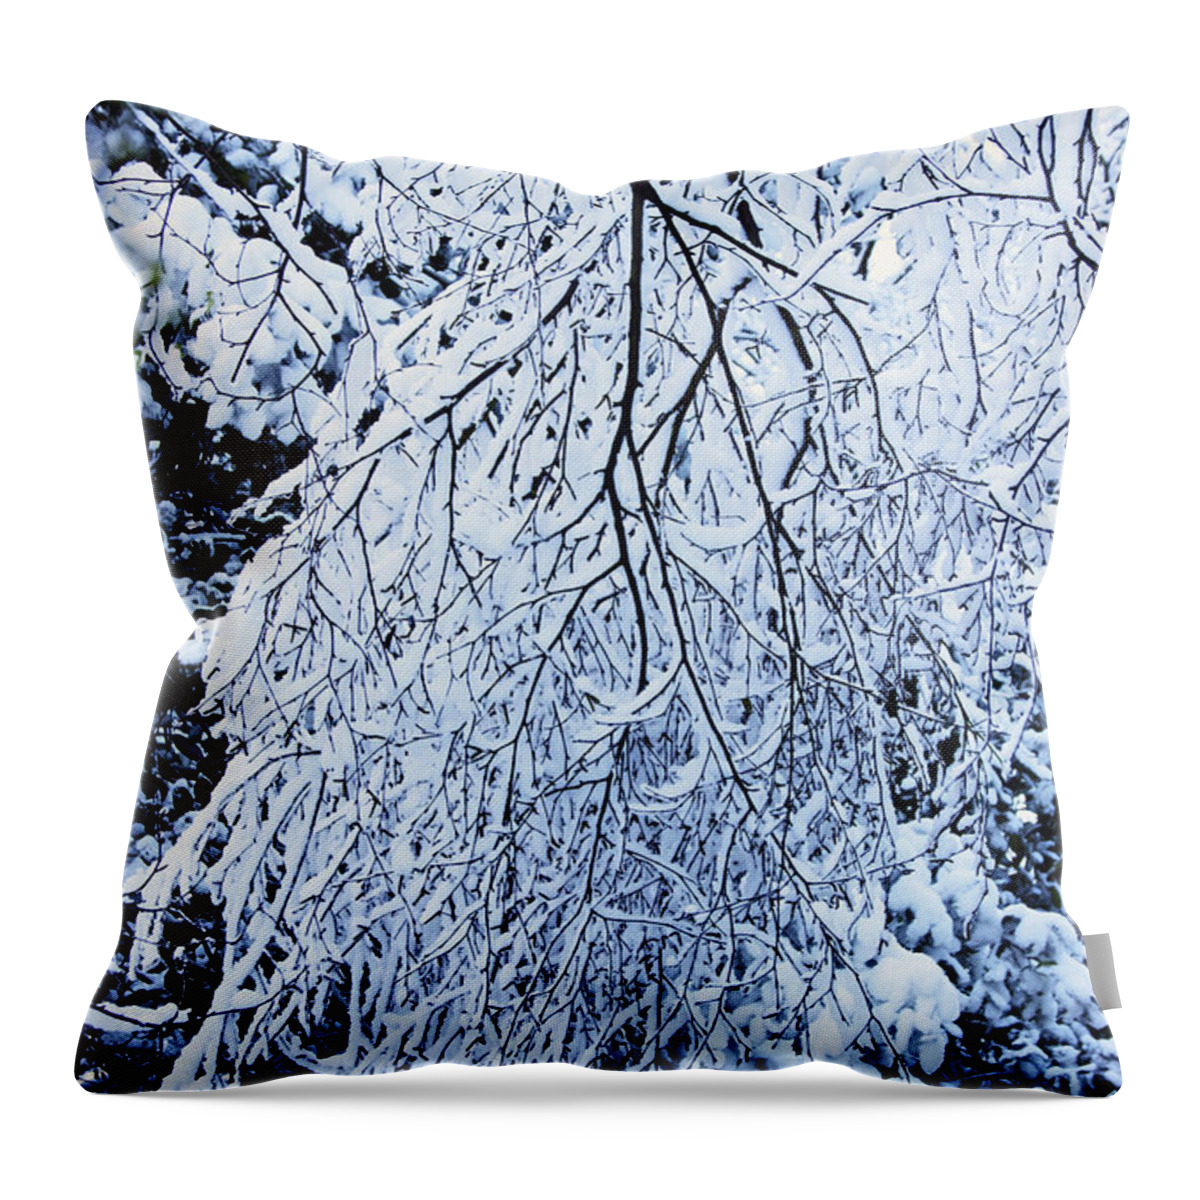 Rivington Throw Pillow featuring the photograph 30/01/19 RIVINGTON. Snow Covered Branches. by Lachlan Main